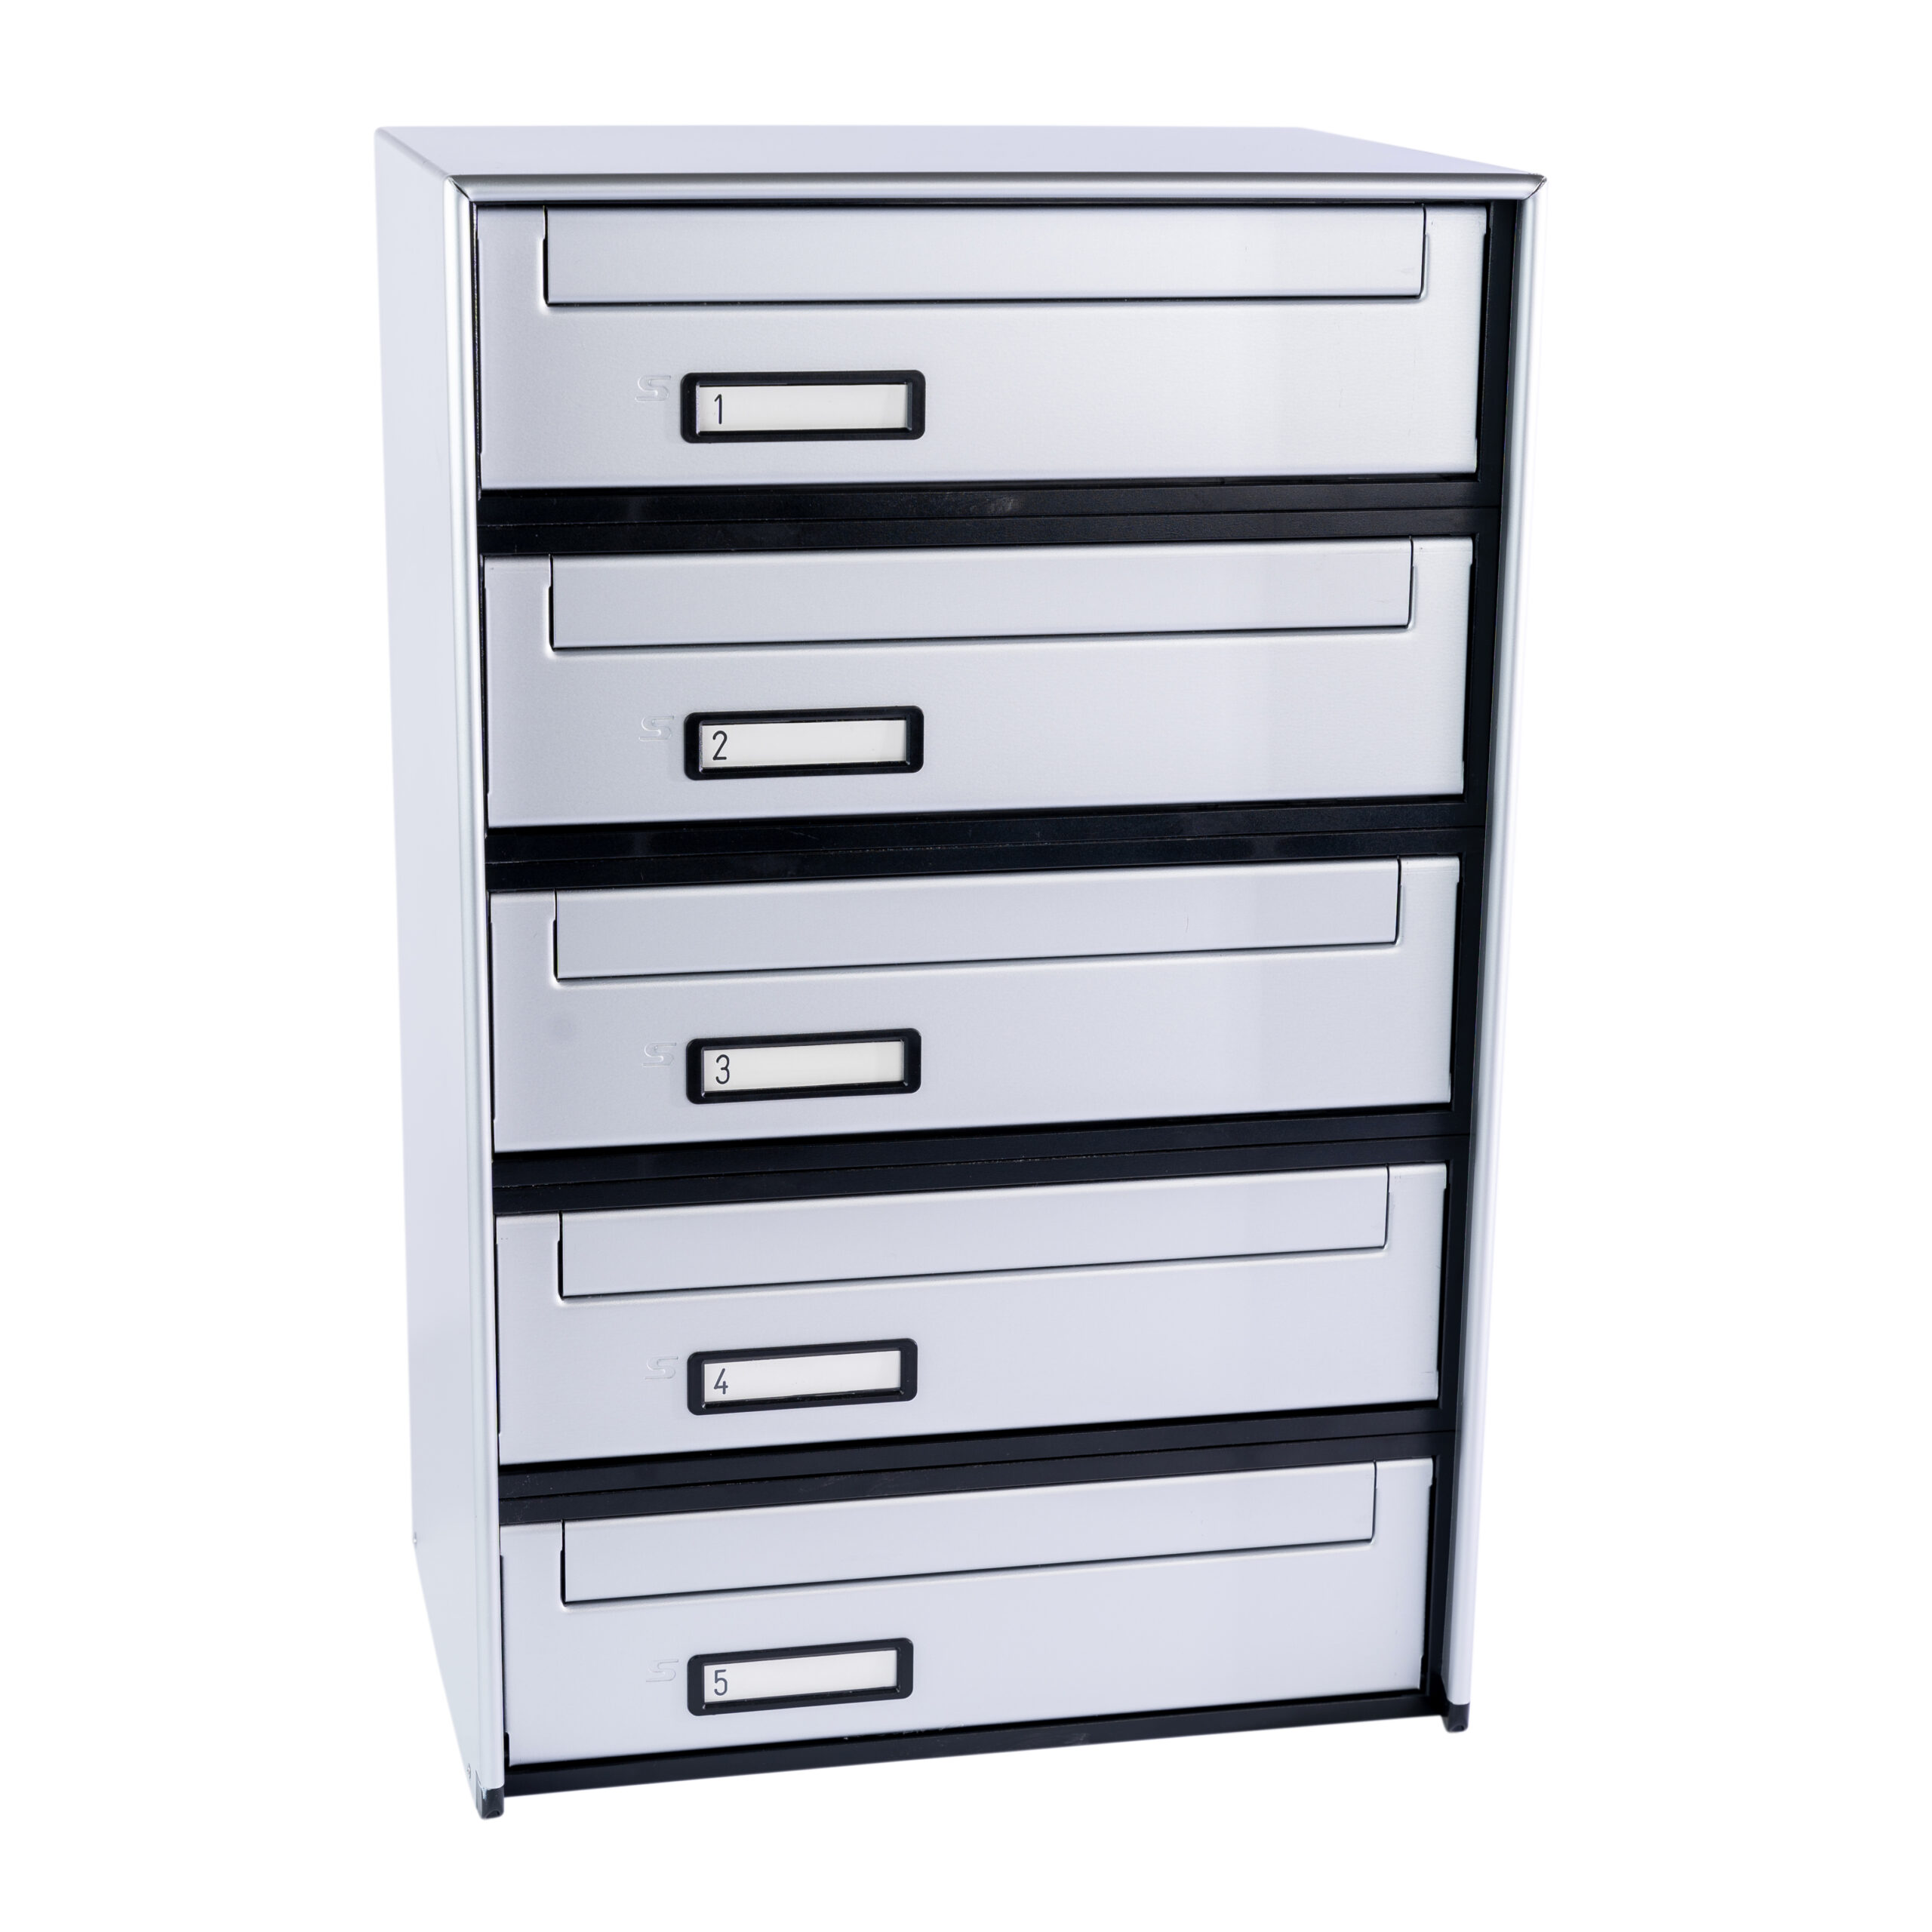 SC6 standard modular letterbox units with rear mail collection – 5 mailboxes